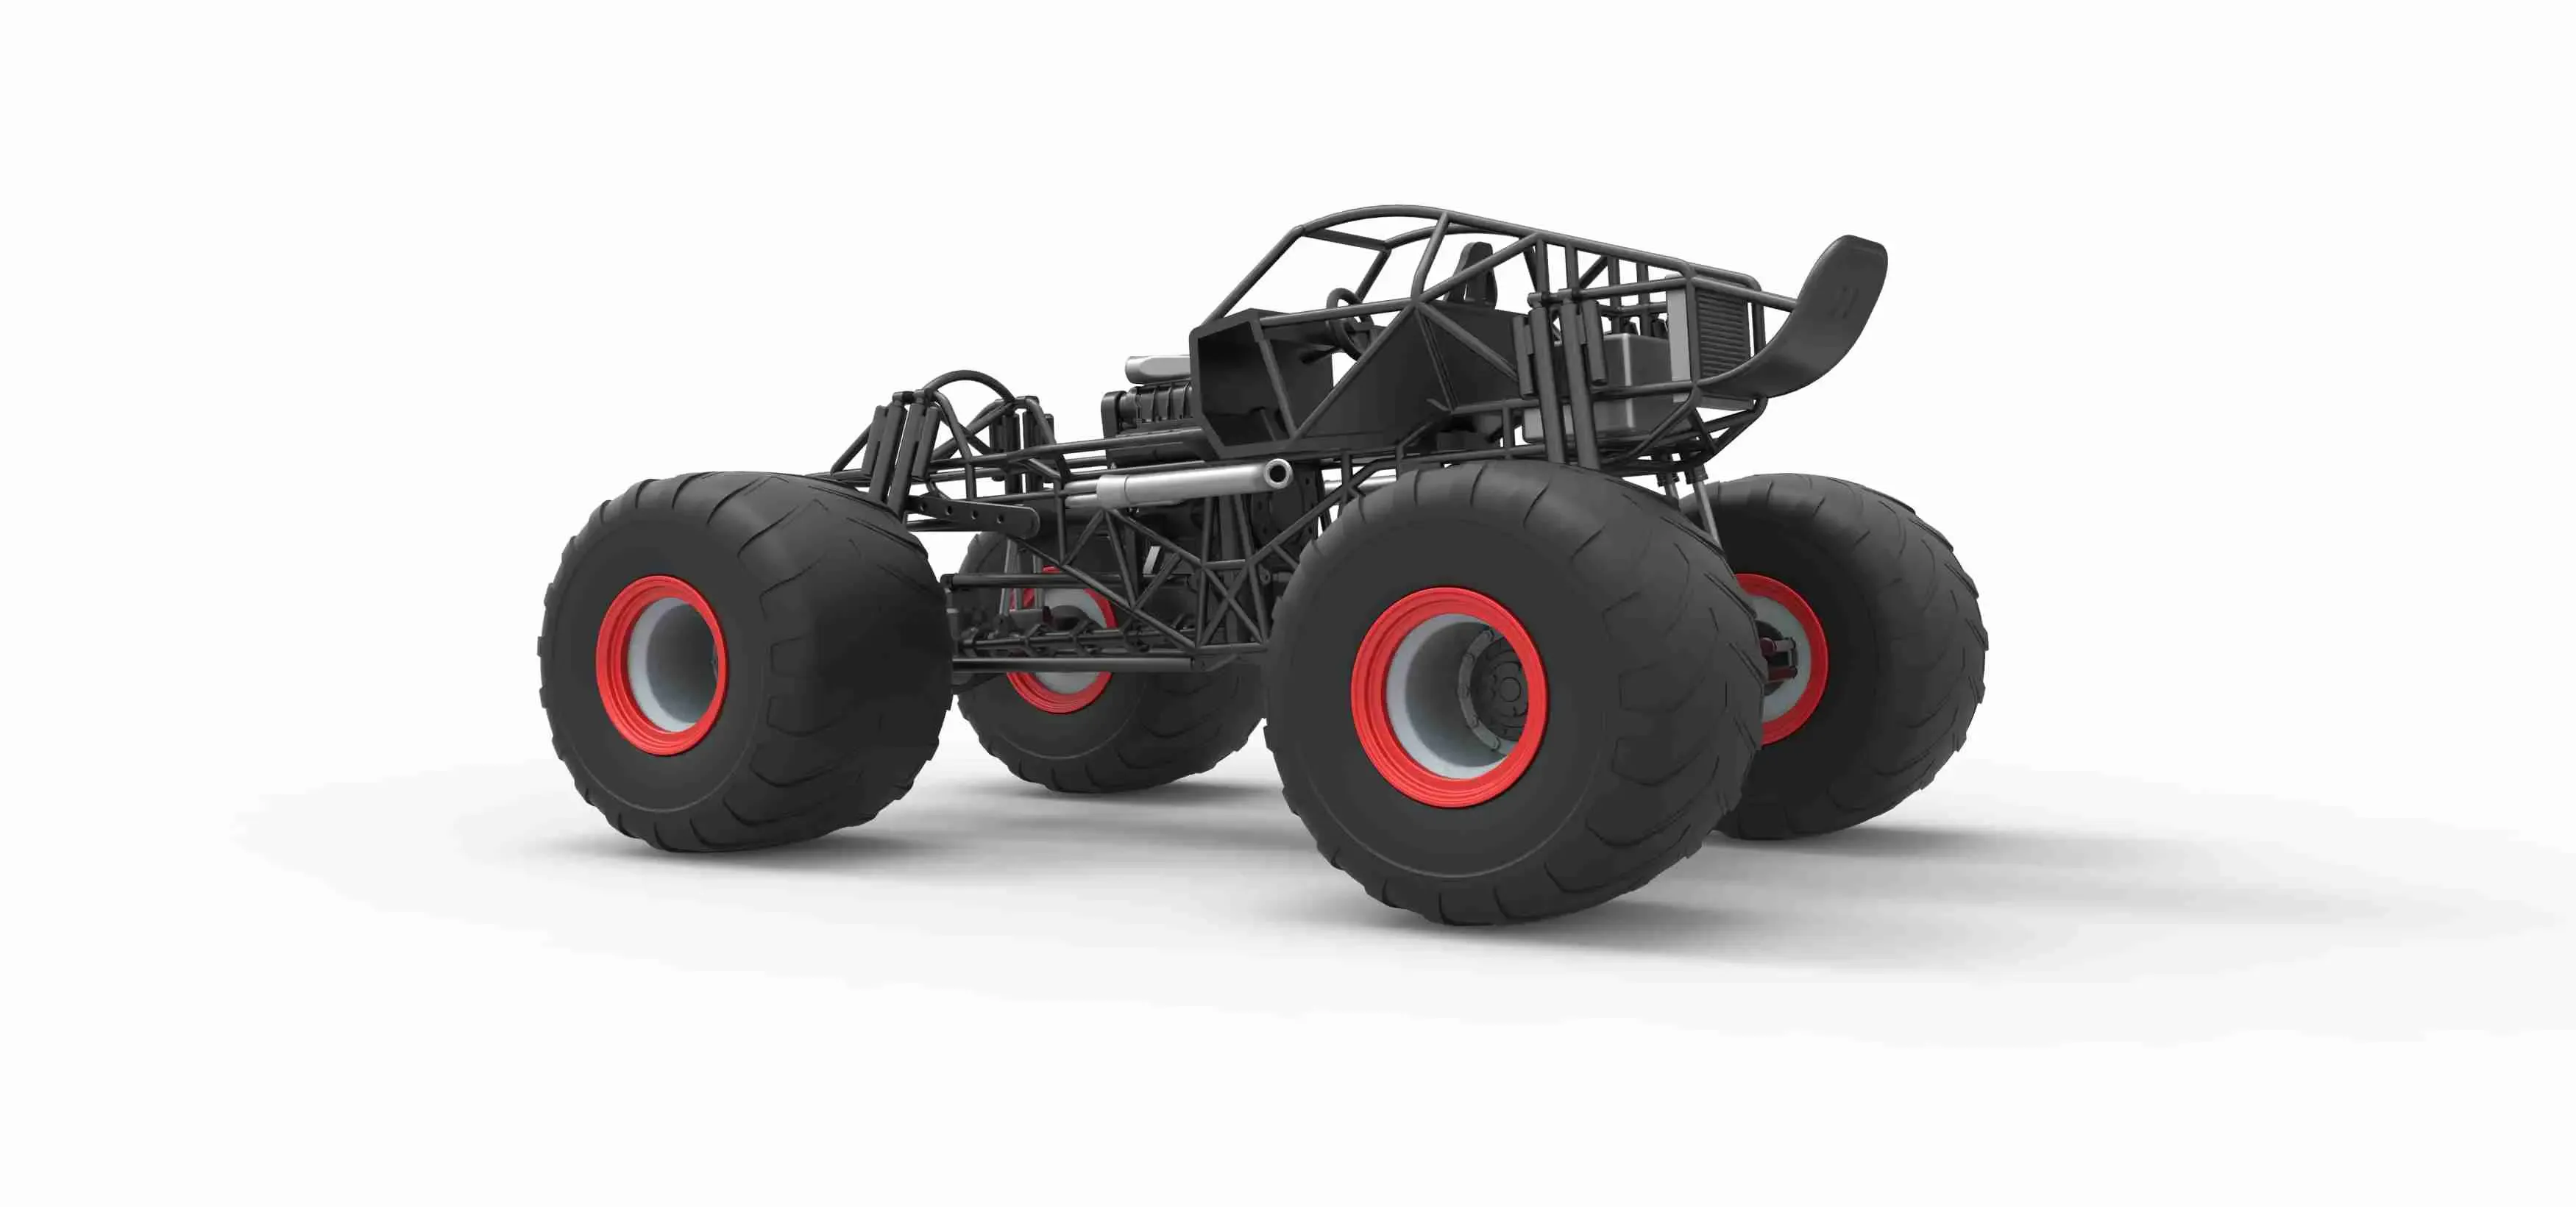 Monster truck base Version 2 Scale 1:25